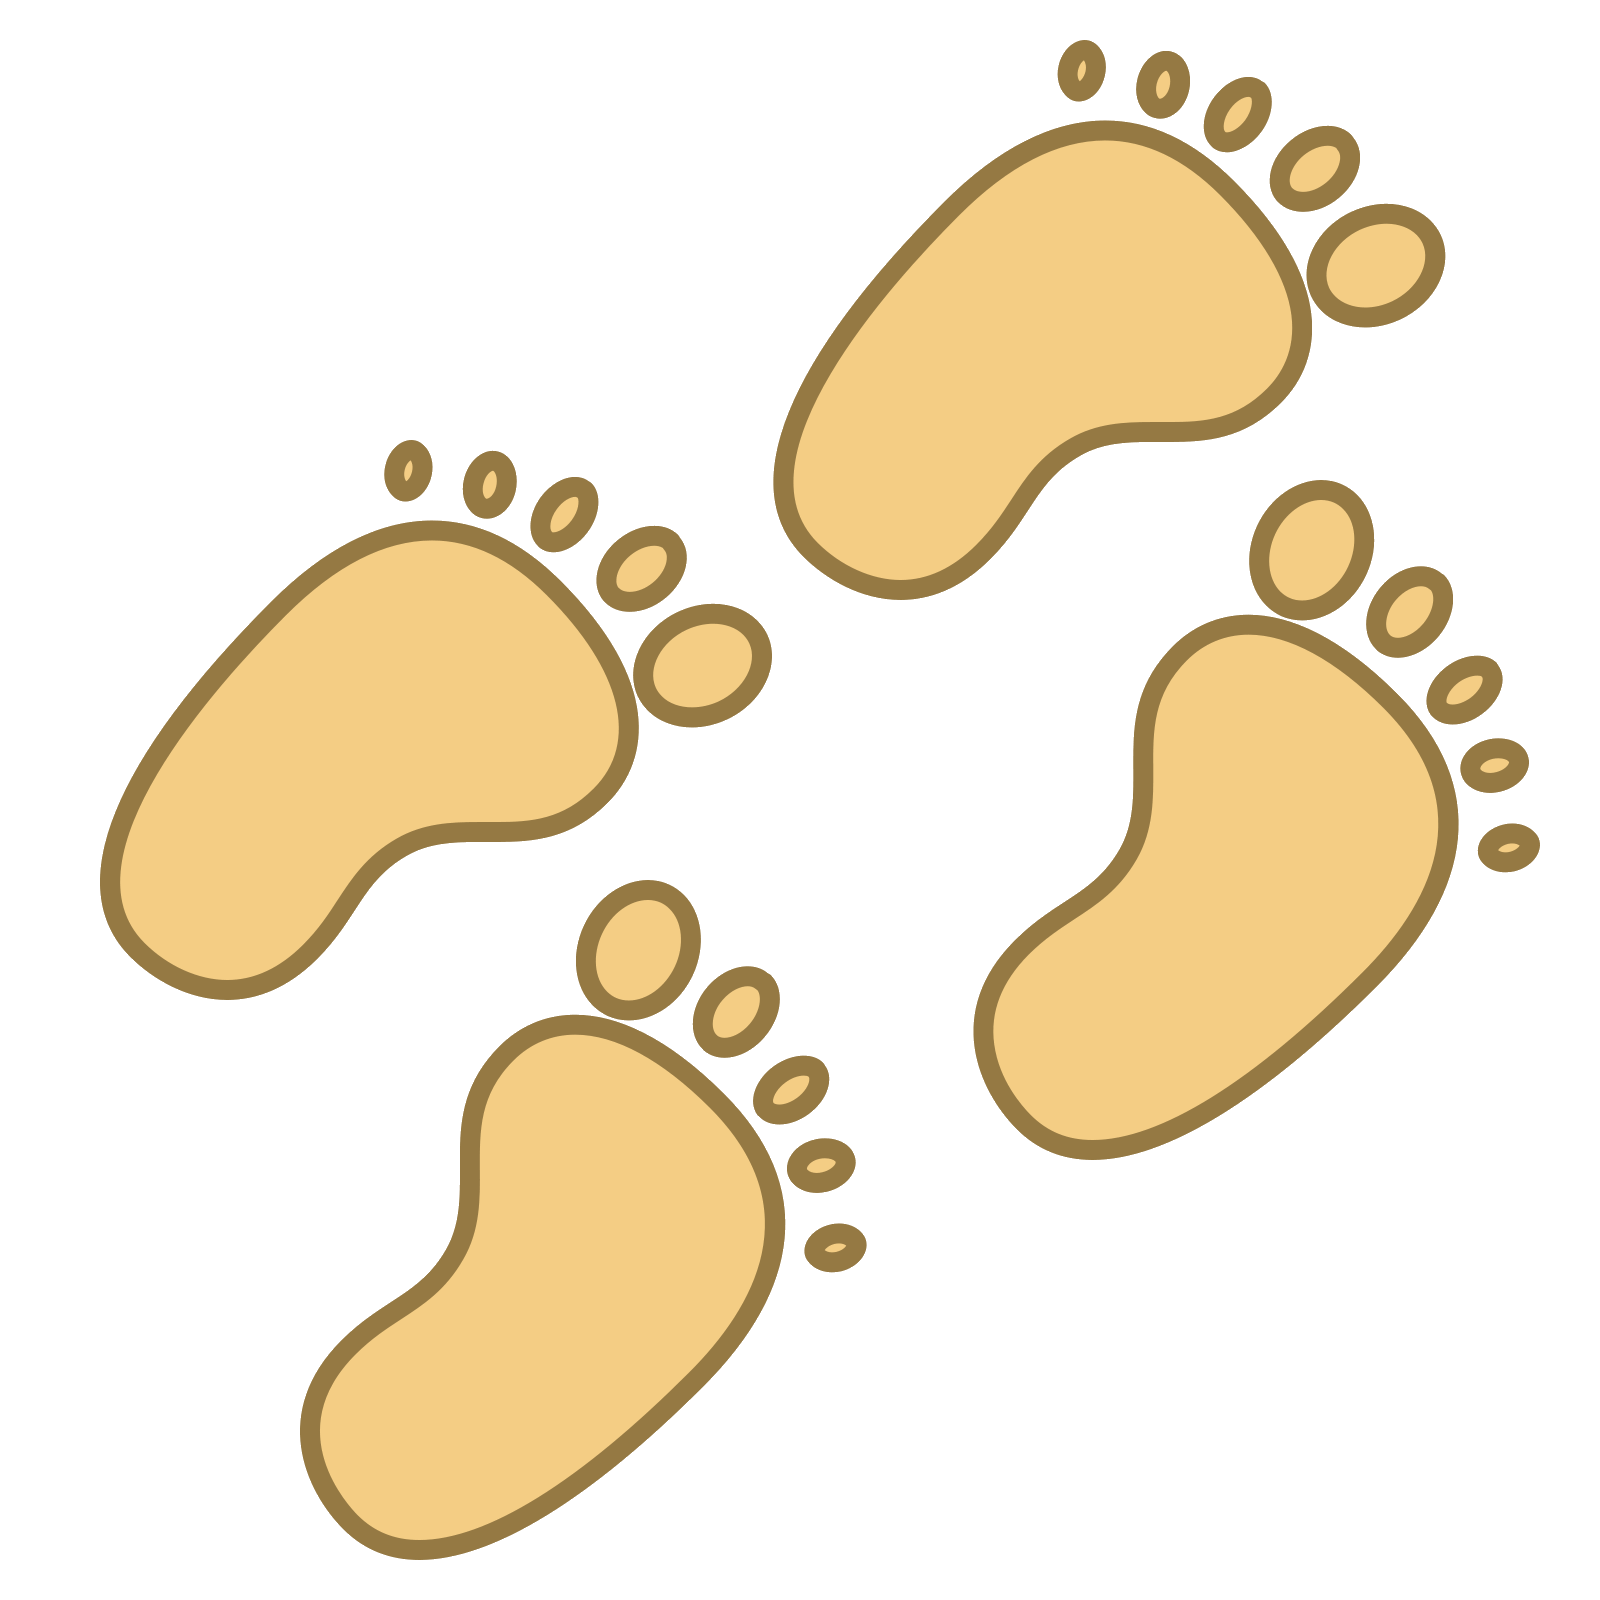 Footsteps clipart human footprint. Baby icon free download